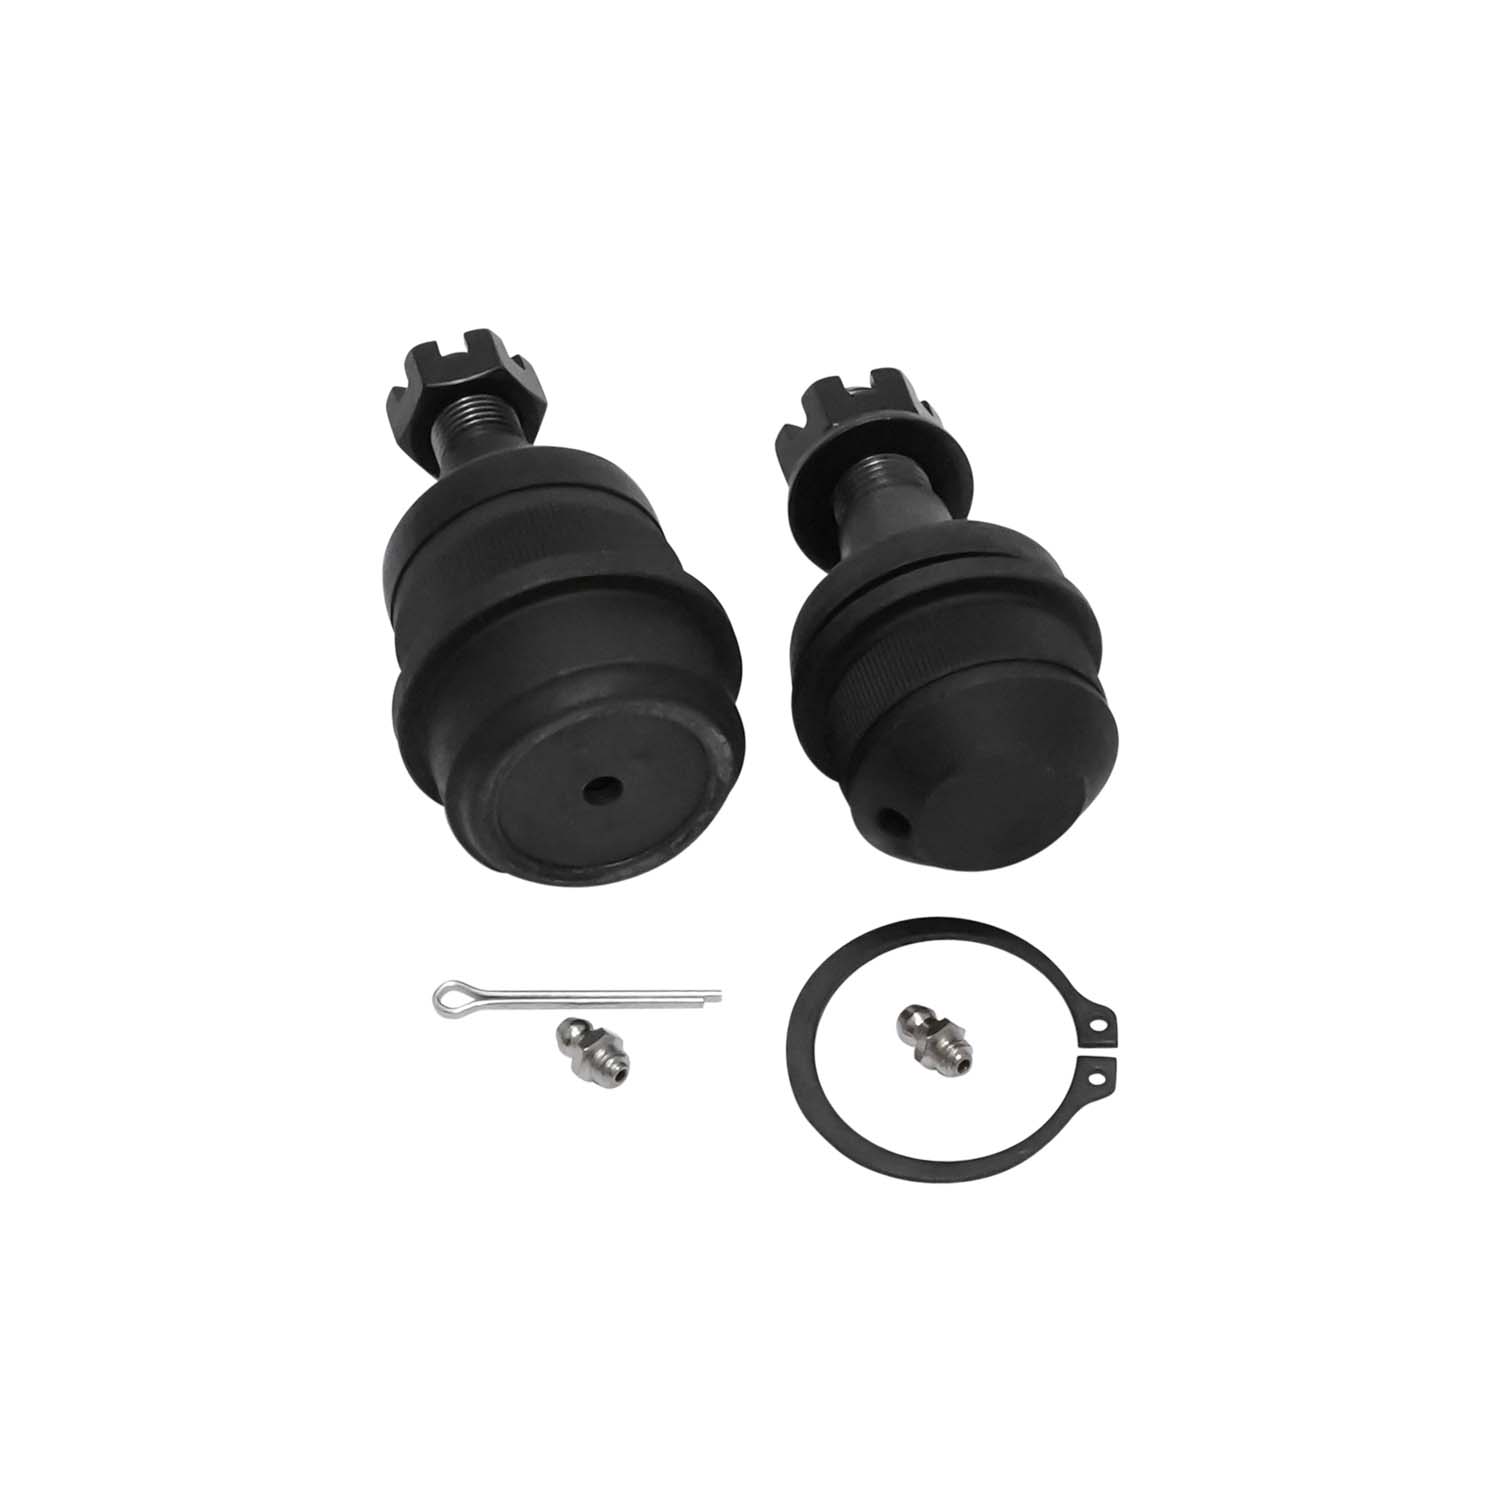 Ball Joint Kit For Dana 30 & Dana 44 Front Differentials, One Side